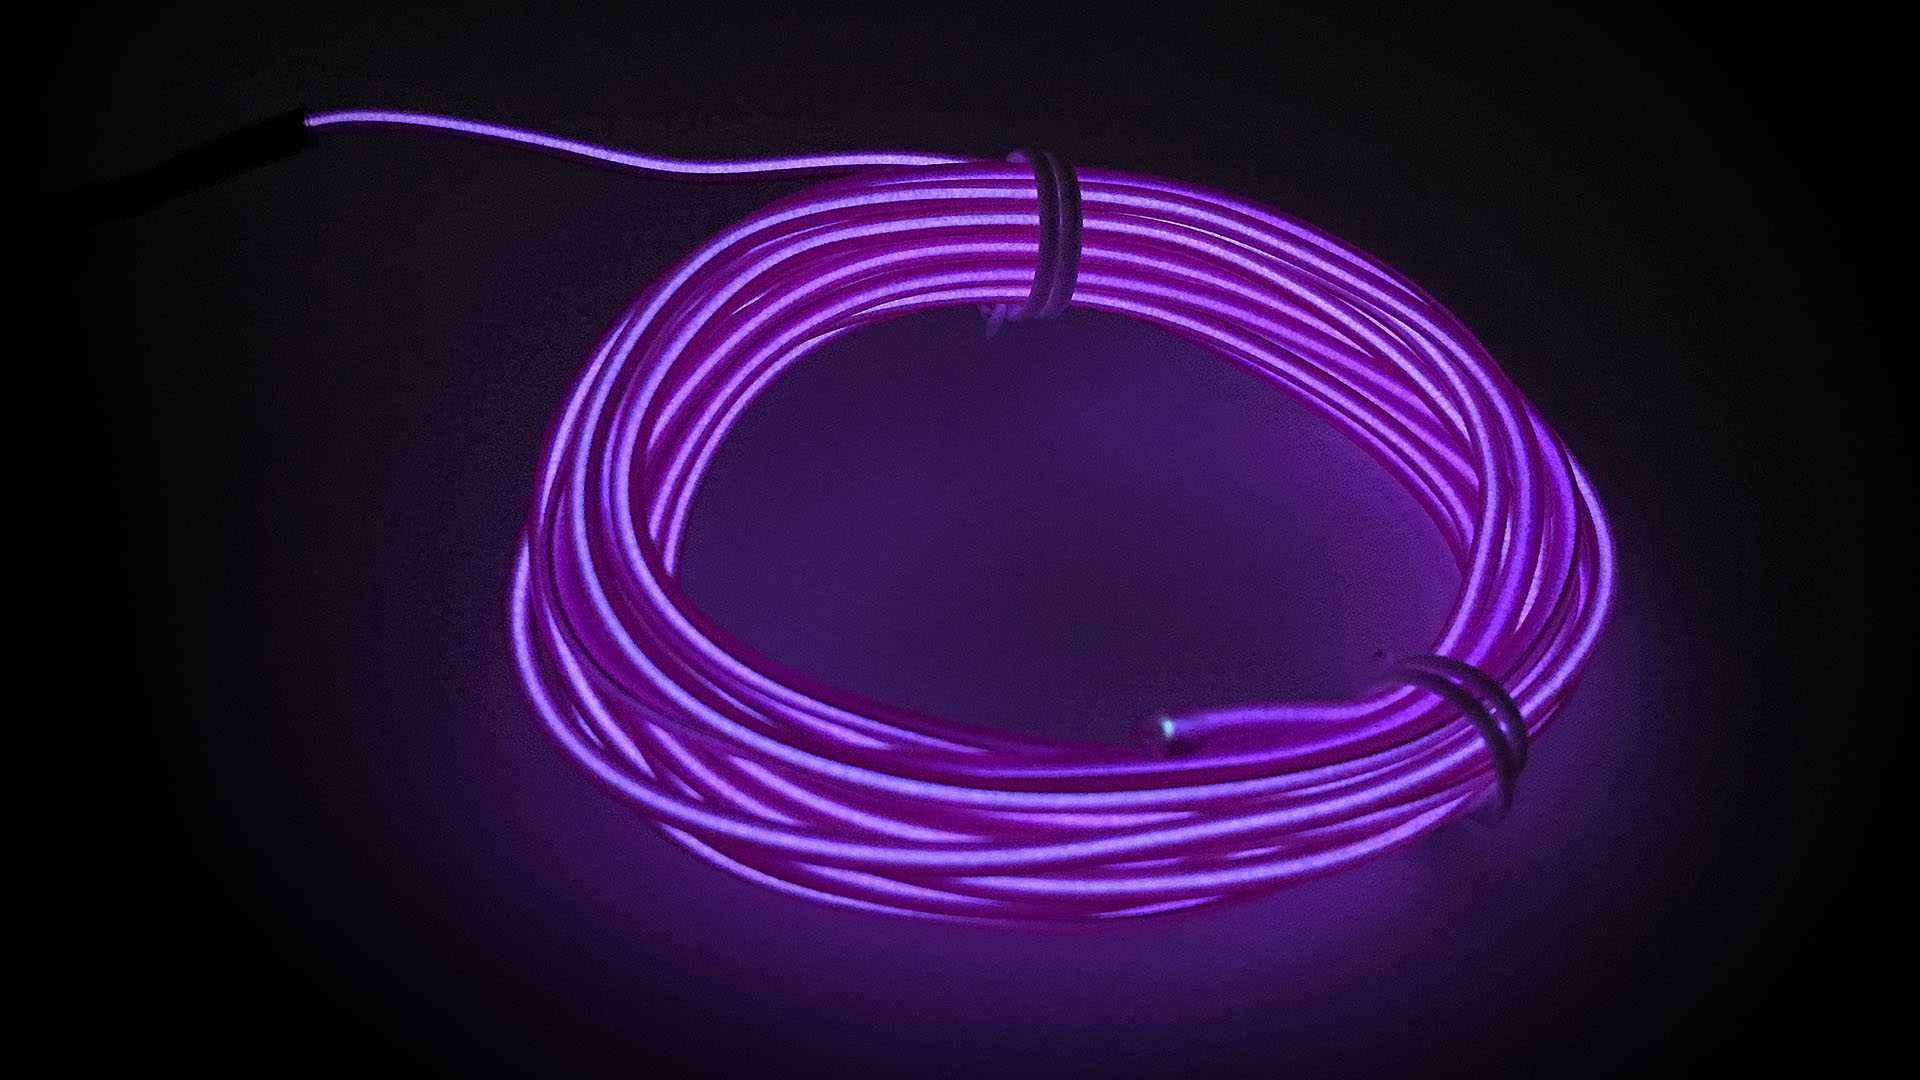 ELWIRA Soft El Wire 2.3 mm x 3m, with connector, purple